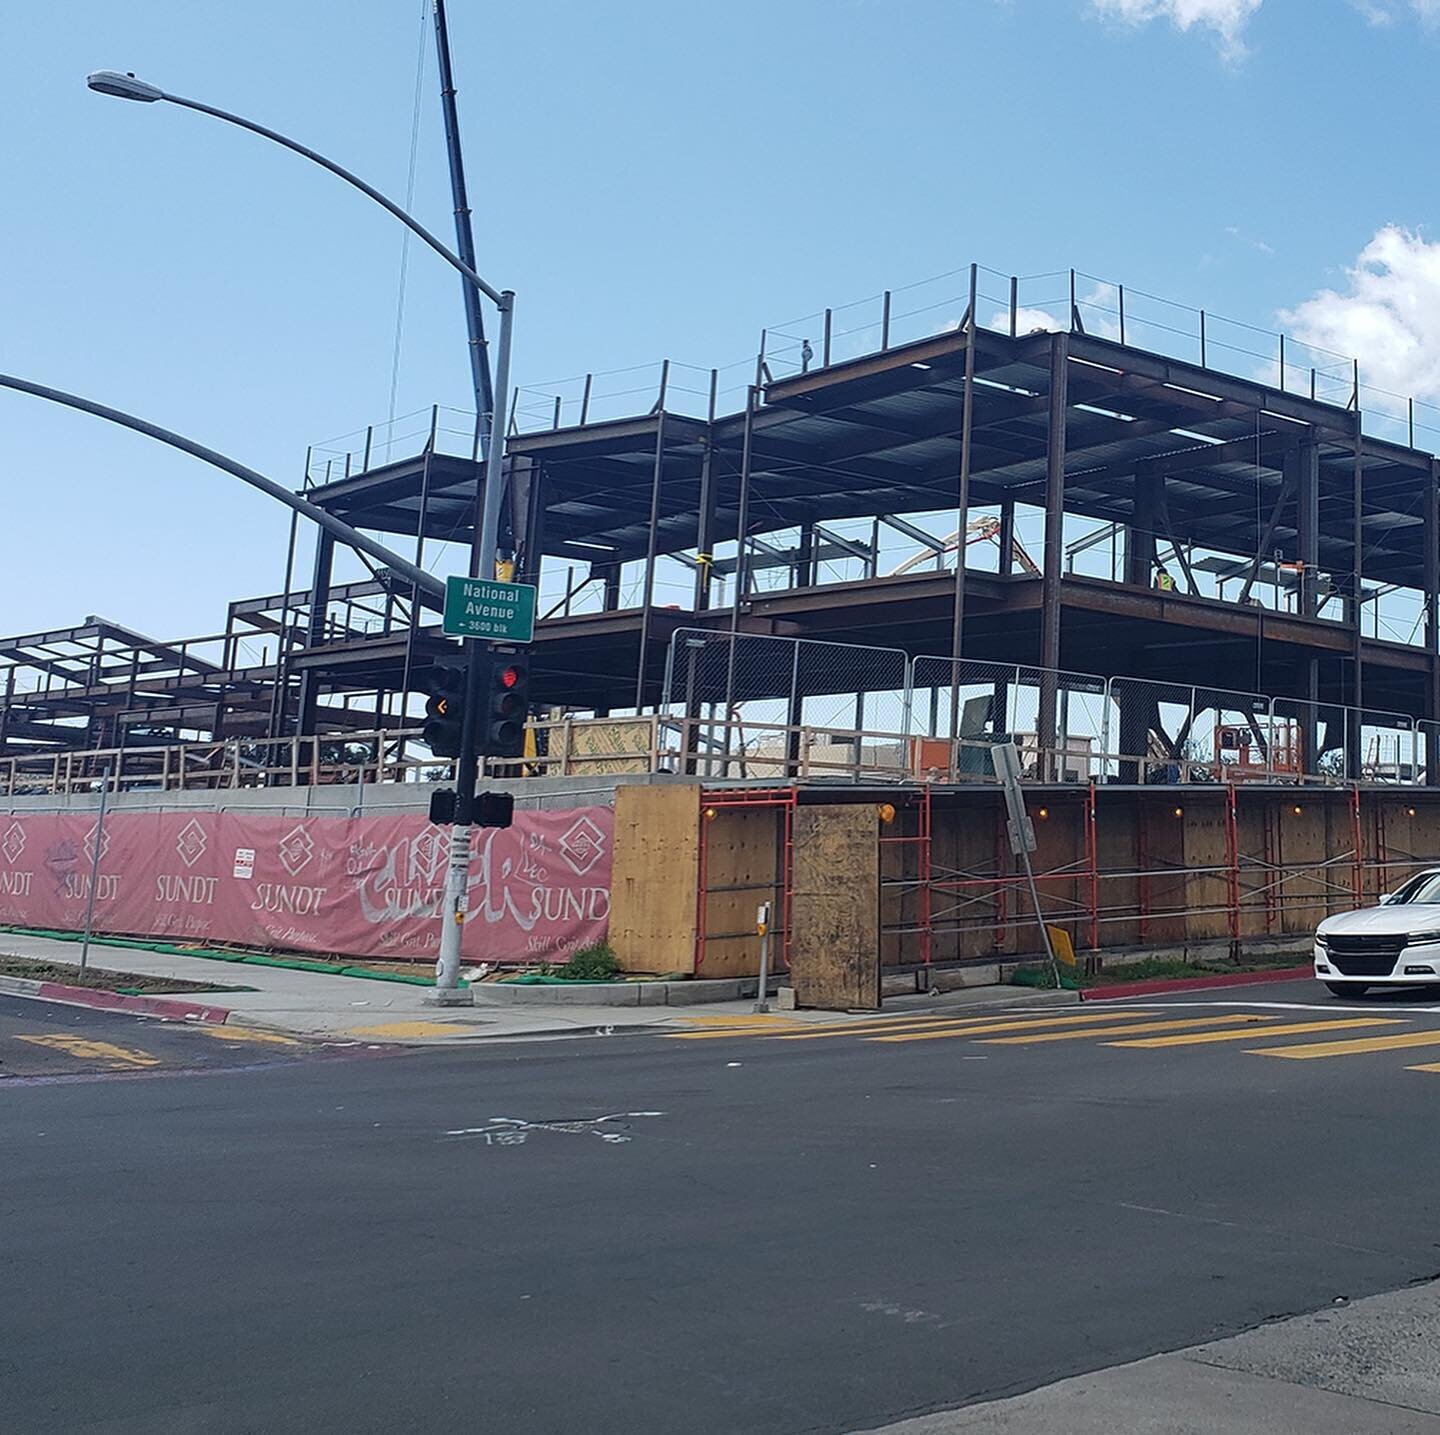 Emerson-Bandini Elementary school is coming along nicely. 🚧 🔨 This view is from the corner of National Avenue and 36th Street. 
#teamdavy believes in designing places that improve lives reinvigorate neighborhoods. We are proud to be part of this tr